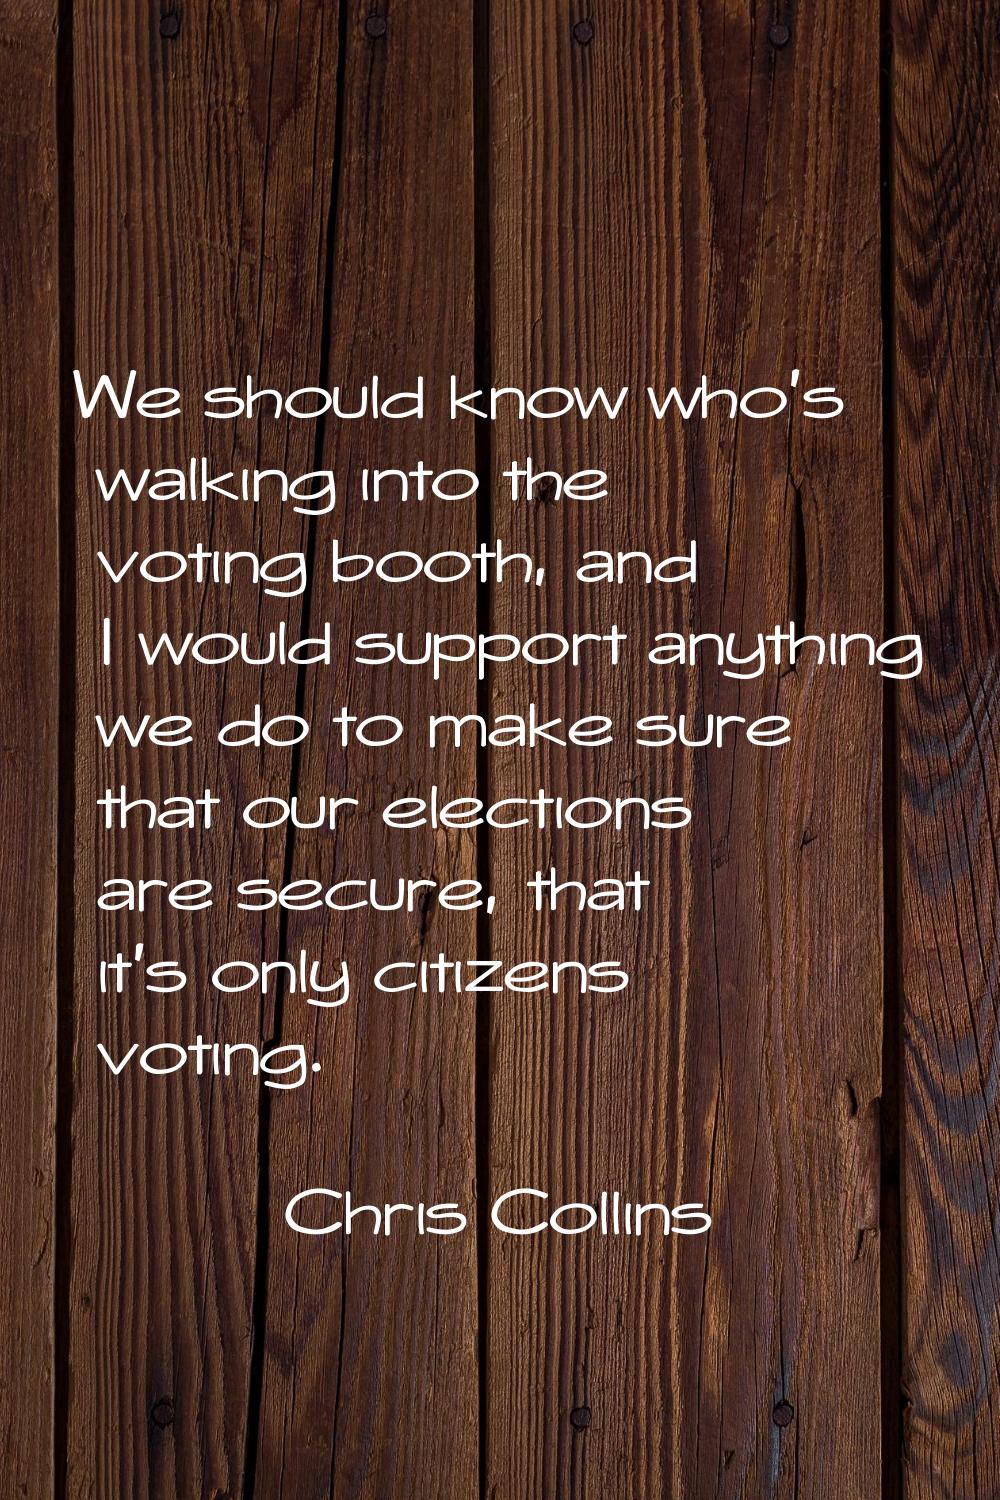 We should know who's walking into the voting booth, and I would support anything we do to make sure